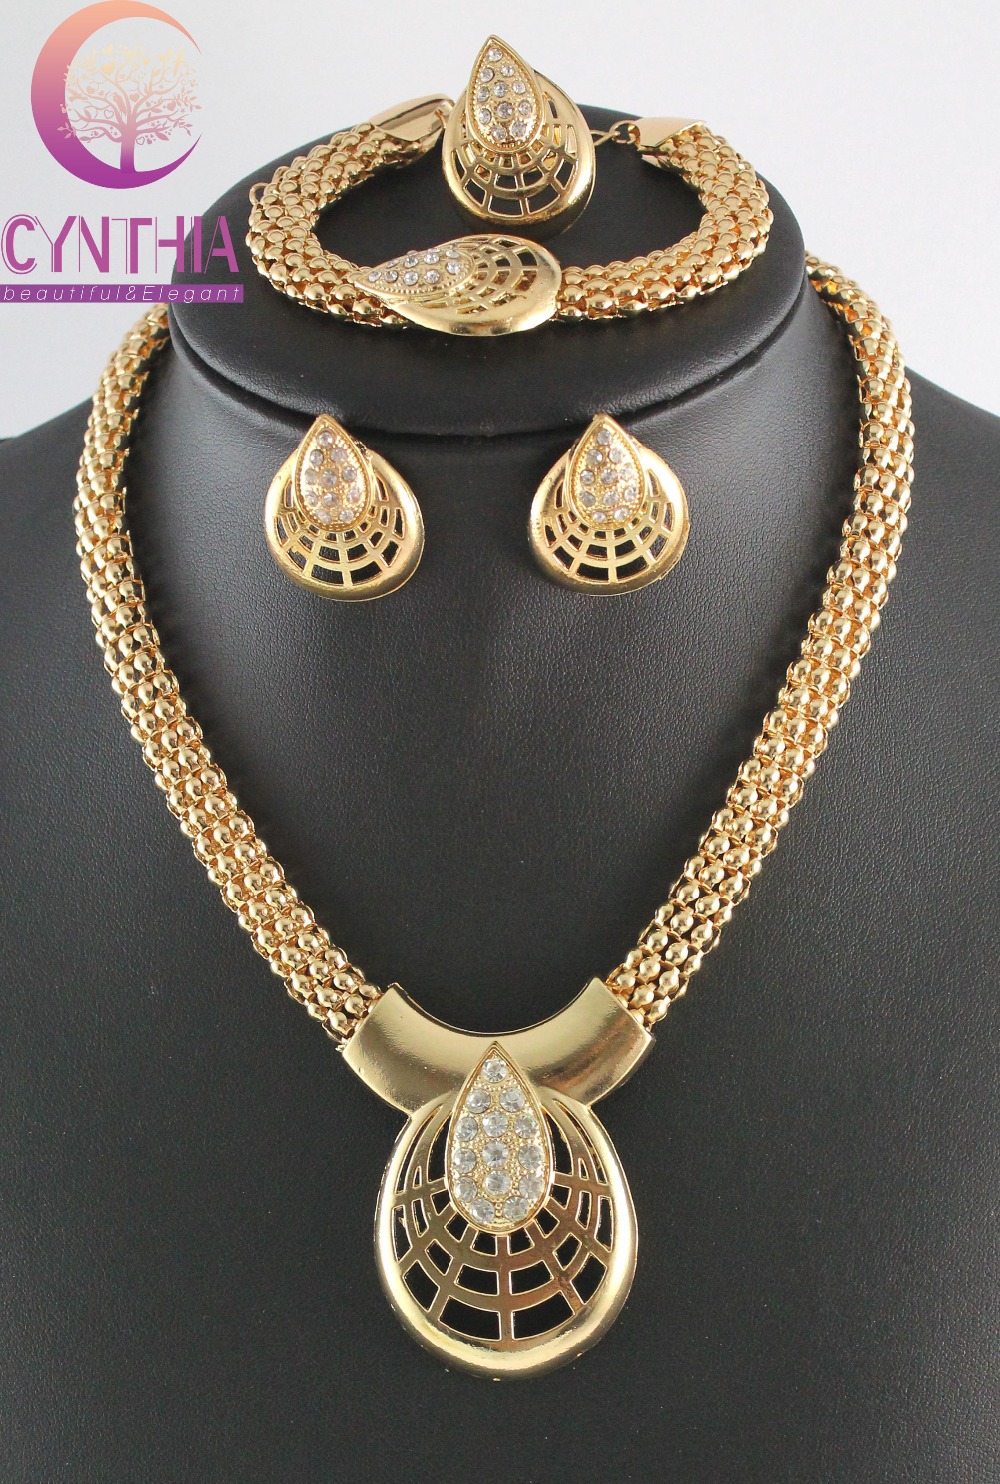 www.paulmartinsmith.com : Buy Hot Sale 18K Gold Plated Crystal African Costume Fashion Necklace Sets For ...